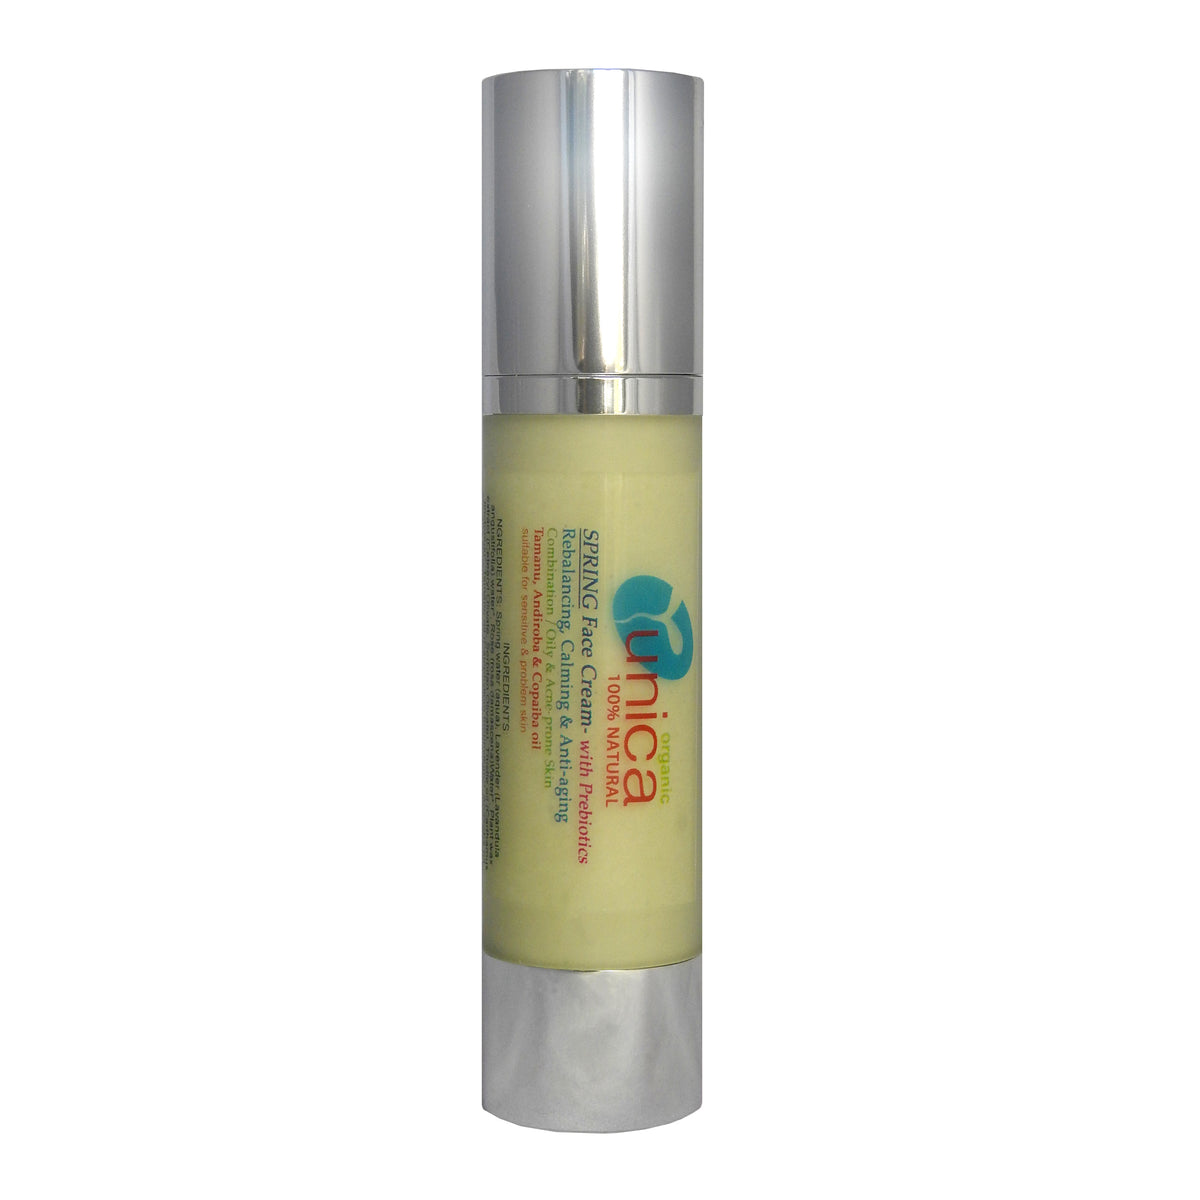 Organic face cream with Prebiotics for oily and acne skin in airless tube. Suitable for sensitive skin eczema, psoriasis. 